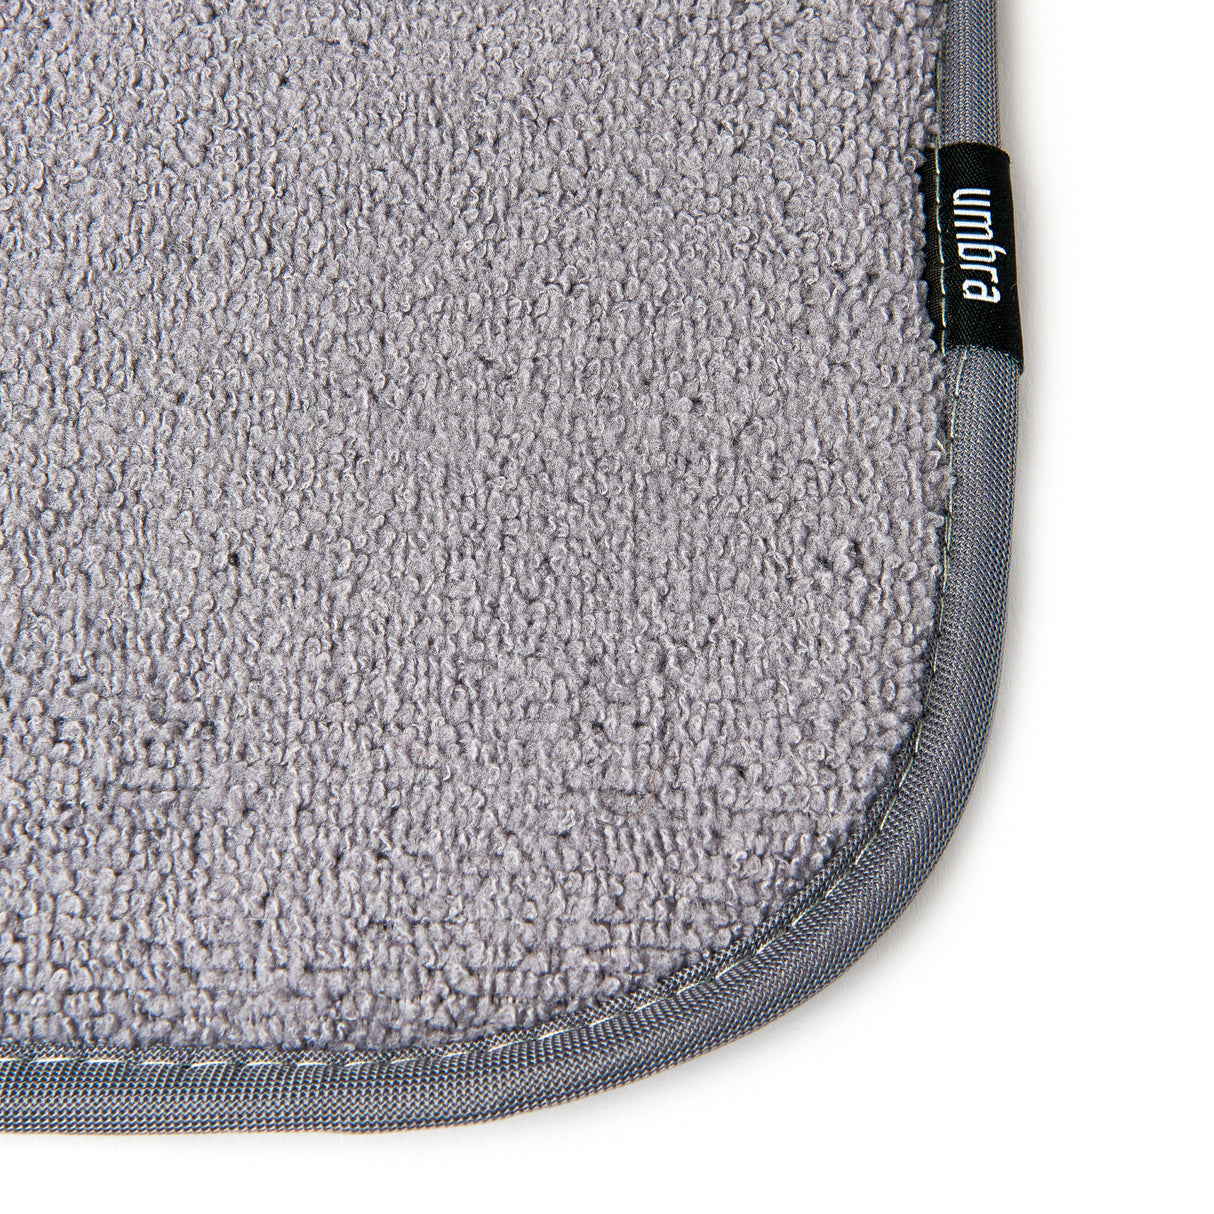 Umbra Dish Drying Mat, Color: Charcoal - JCPenney